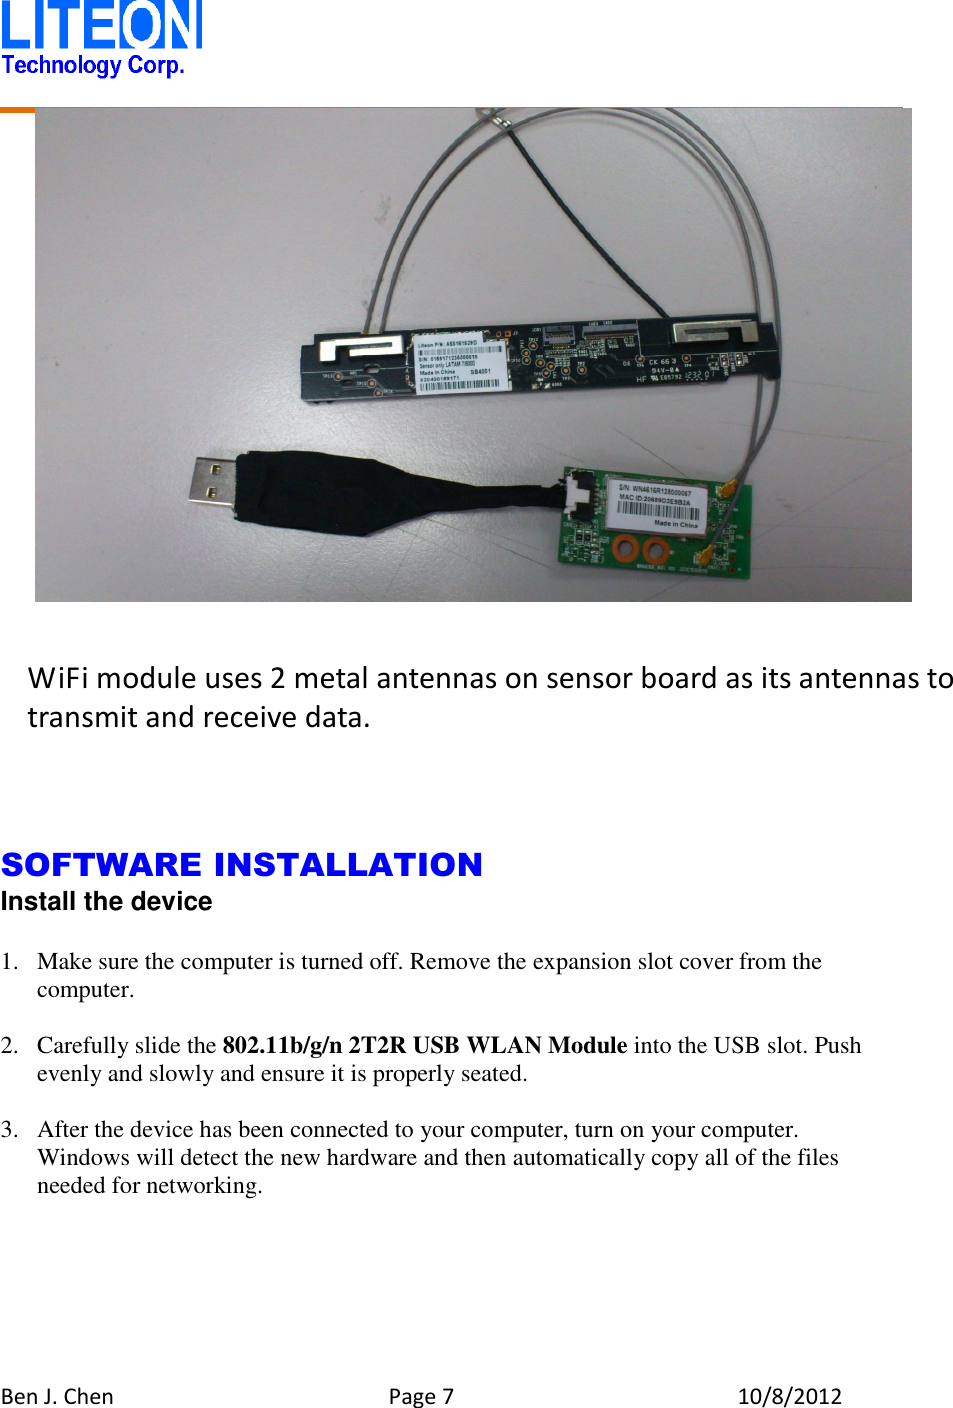   Ben J. Chen  Page 7  10/8/2012                   SOFTWARE INSTALLATION Install the device  1. Make sure the computer is turned off. Remove the expansion slot cover from the computer.  2. Carefully slide the 802.11b/g/n 2T2R USB WLAN Module into the USB slot. Push evenly and slowly and ensure it is properly seated.  3. After the device has been connected to your computer, turn on your computer. Windows will detect the new hardware and then automatically copy all of the files needed for networking.  WiFi module uses 2 metal antennas on sensor board as its antennas to transmit and receive data. 